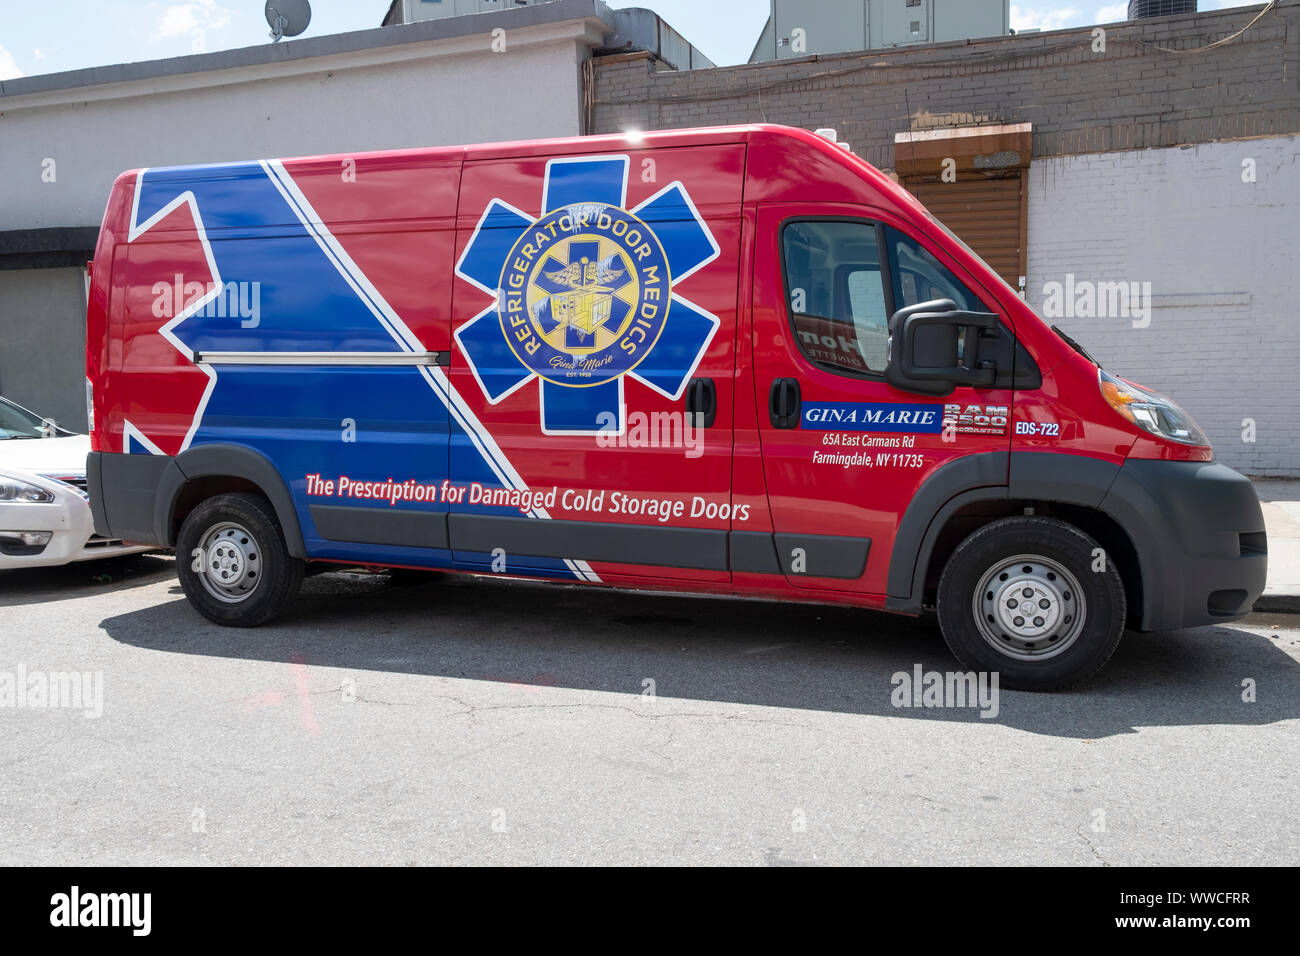 UNUSUAL BUSINESS. A van for Refrigerator Door medics, a portable business. Parked in Corona, Queens, New York City. Stock Photo